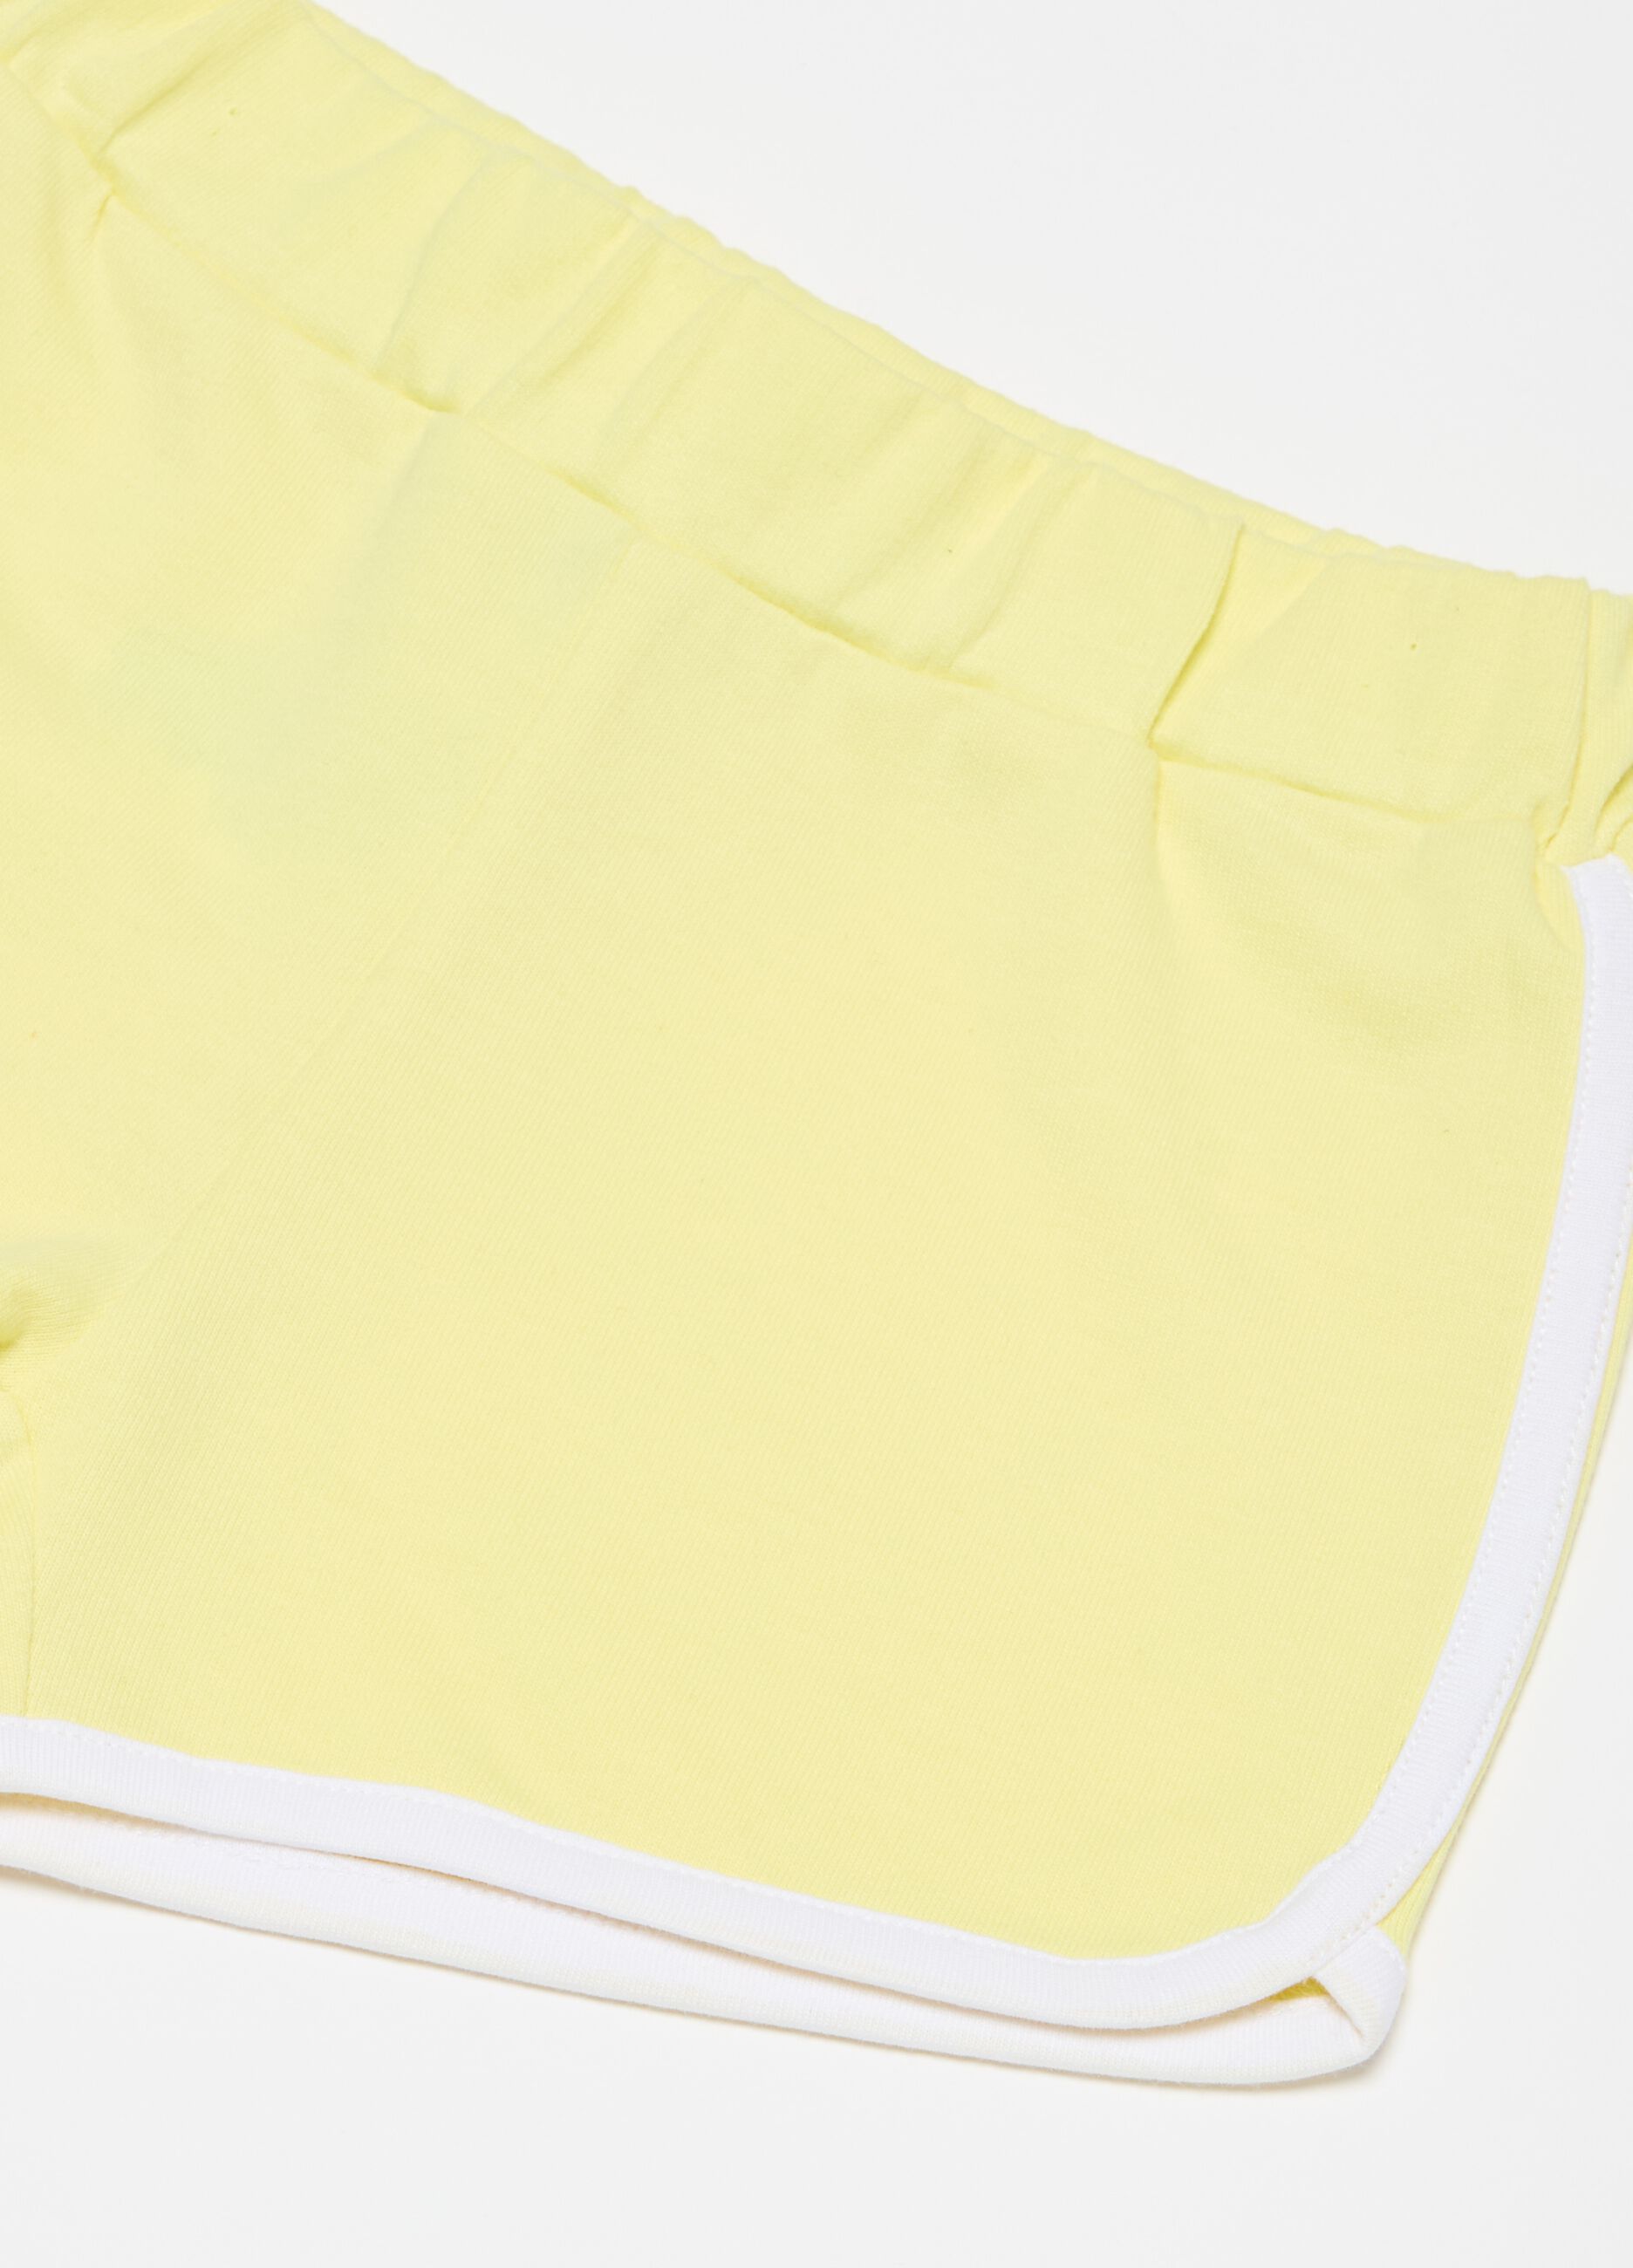 Plush shorts with contrasting colour trims